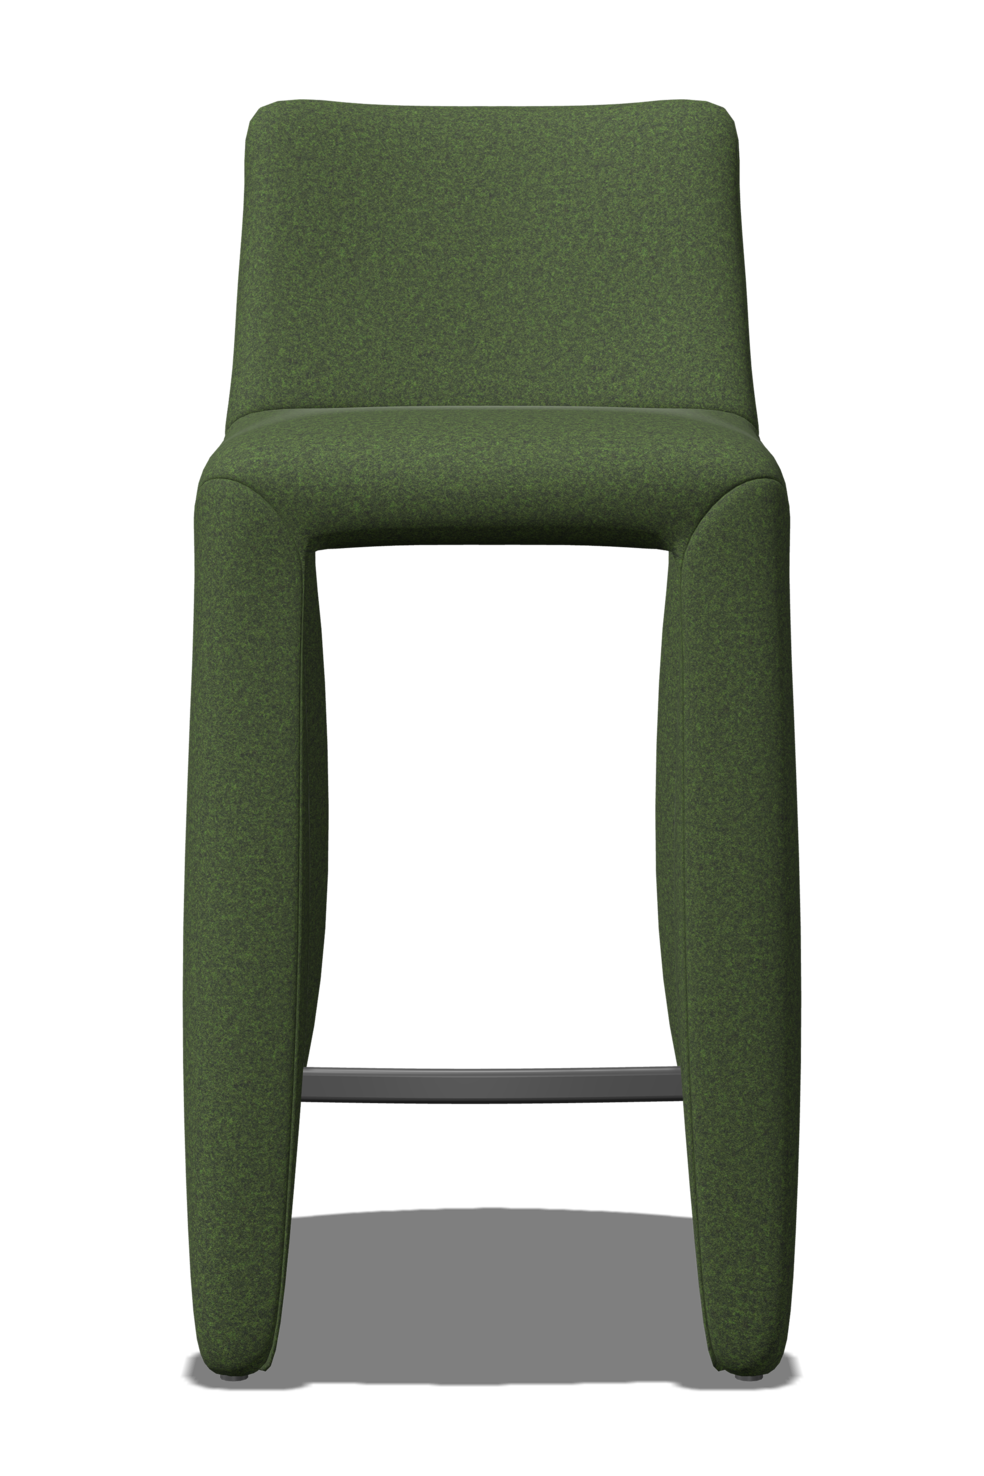 Monster Barstool low no stitching green